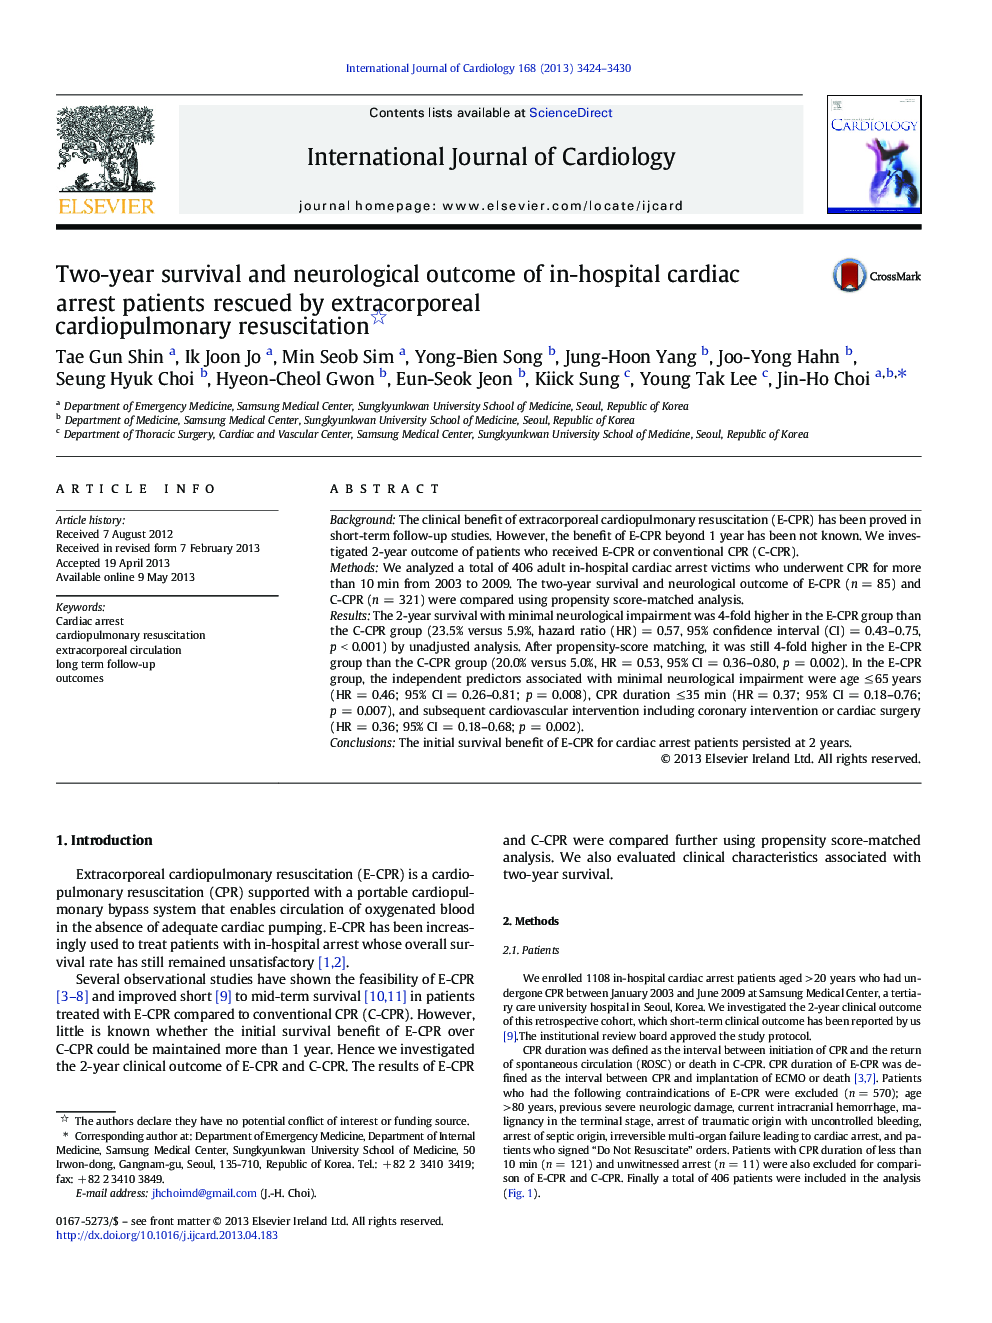 Two-year survival and neurological outcome of in-hospital cardiac arrest patients rescued by extracorporeal cardiopulmonary resuscitation